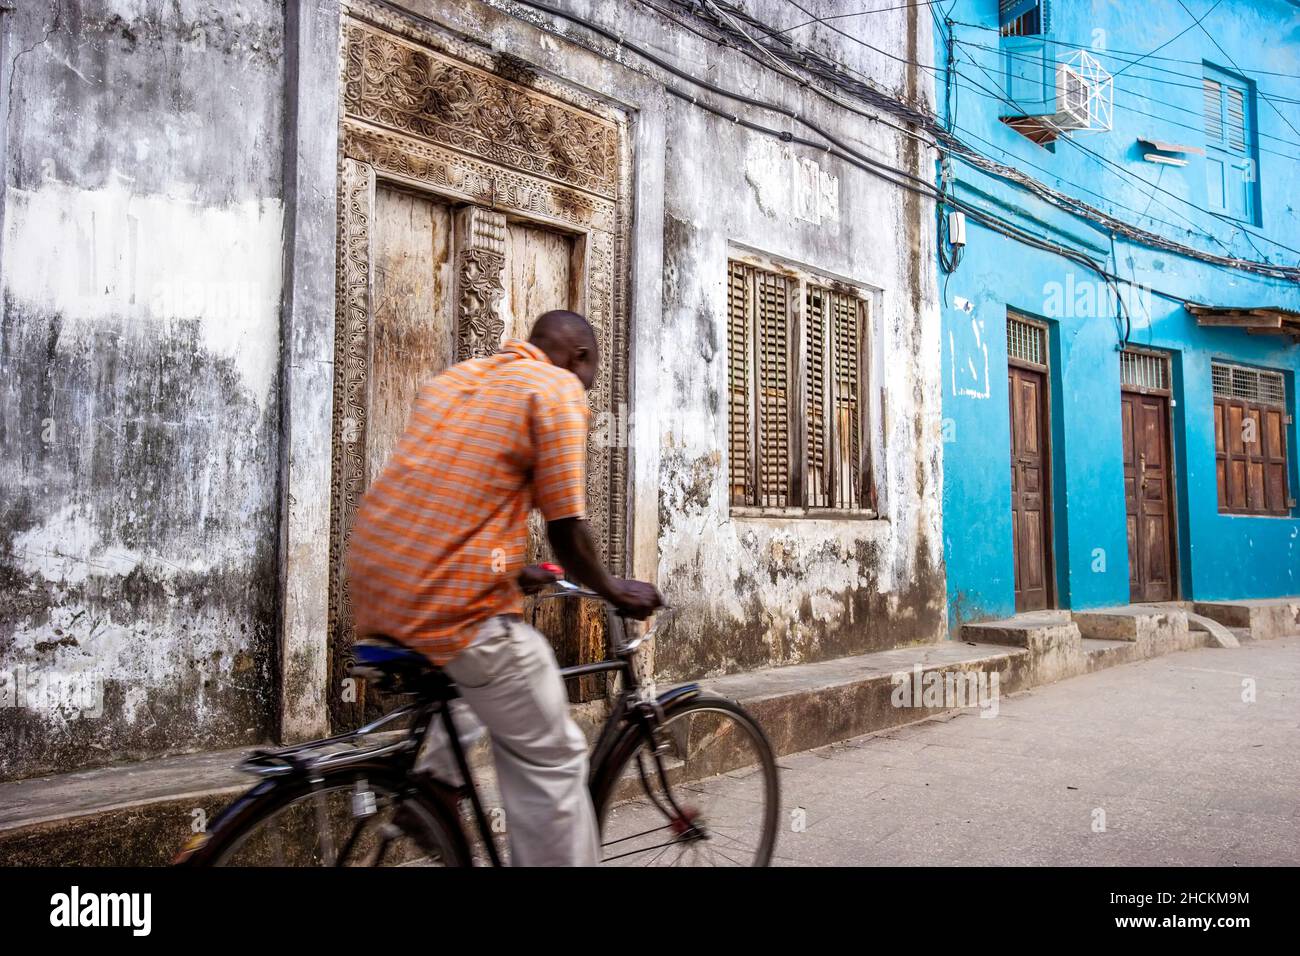 A local on his bicycle in a nattow alleway in Stone Town, Zanzibar, Tanzania. Stock Photo